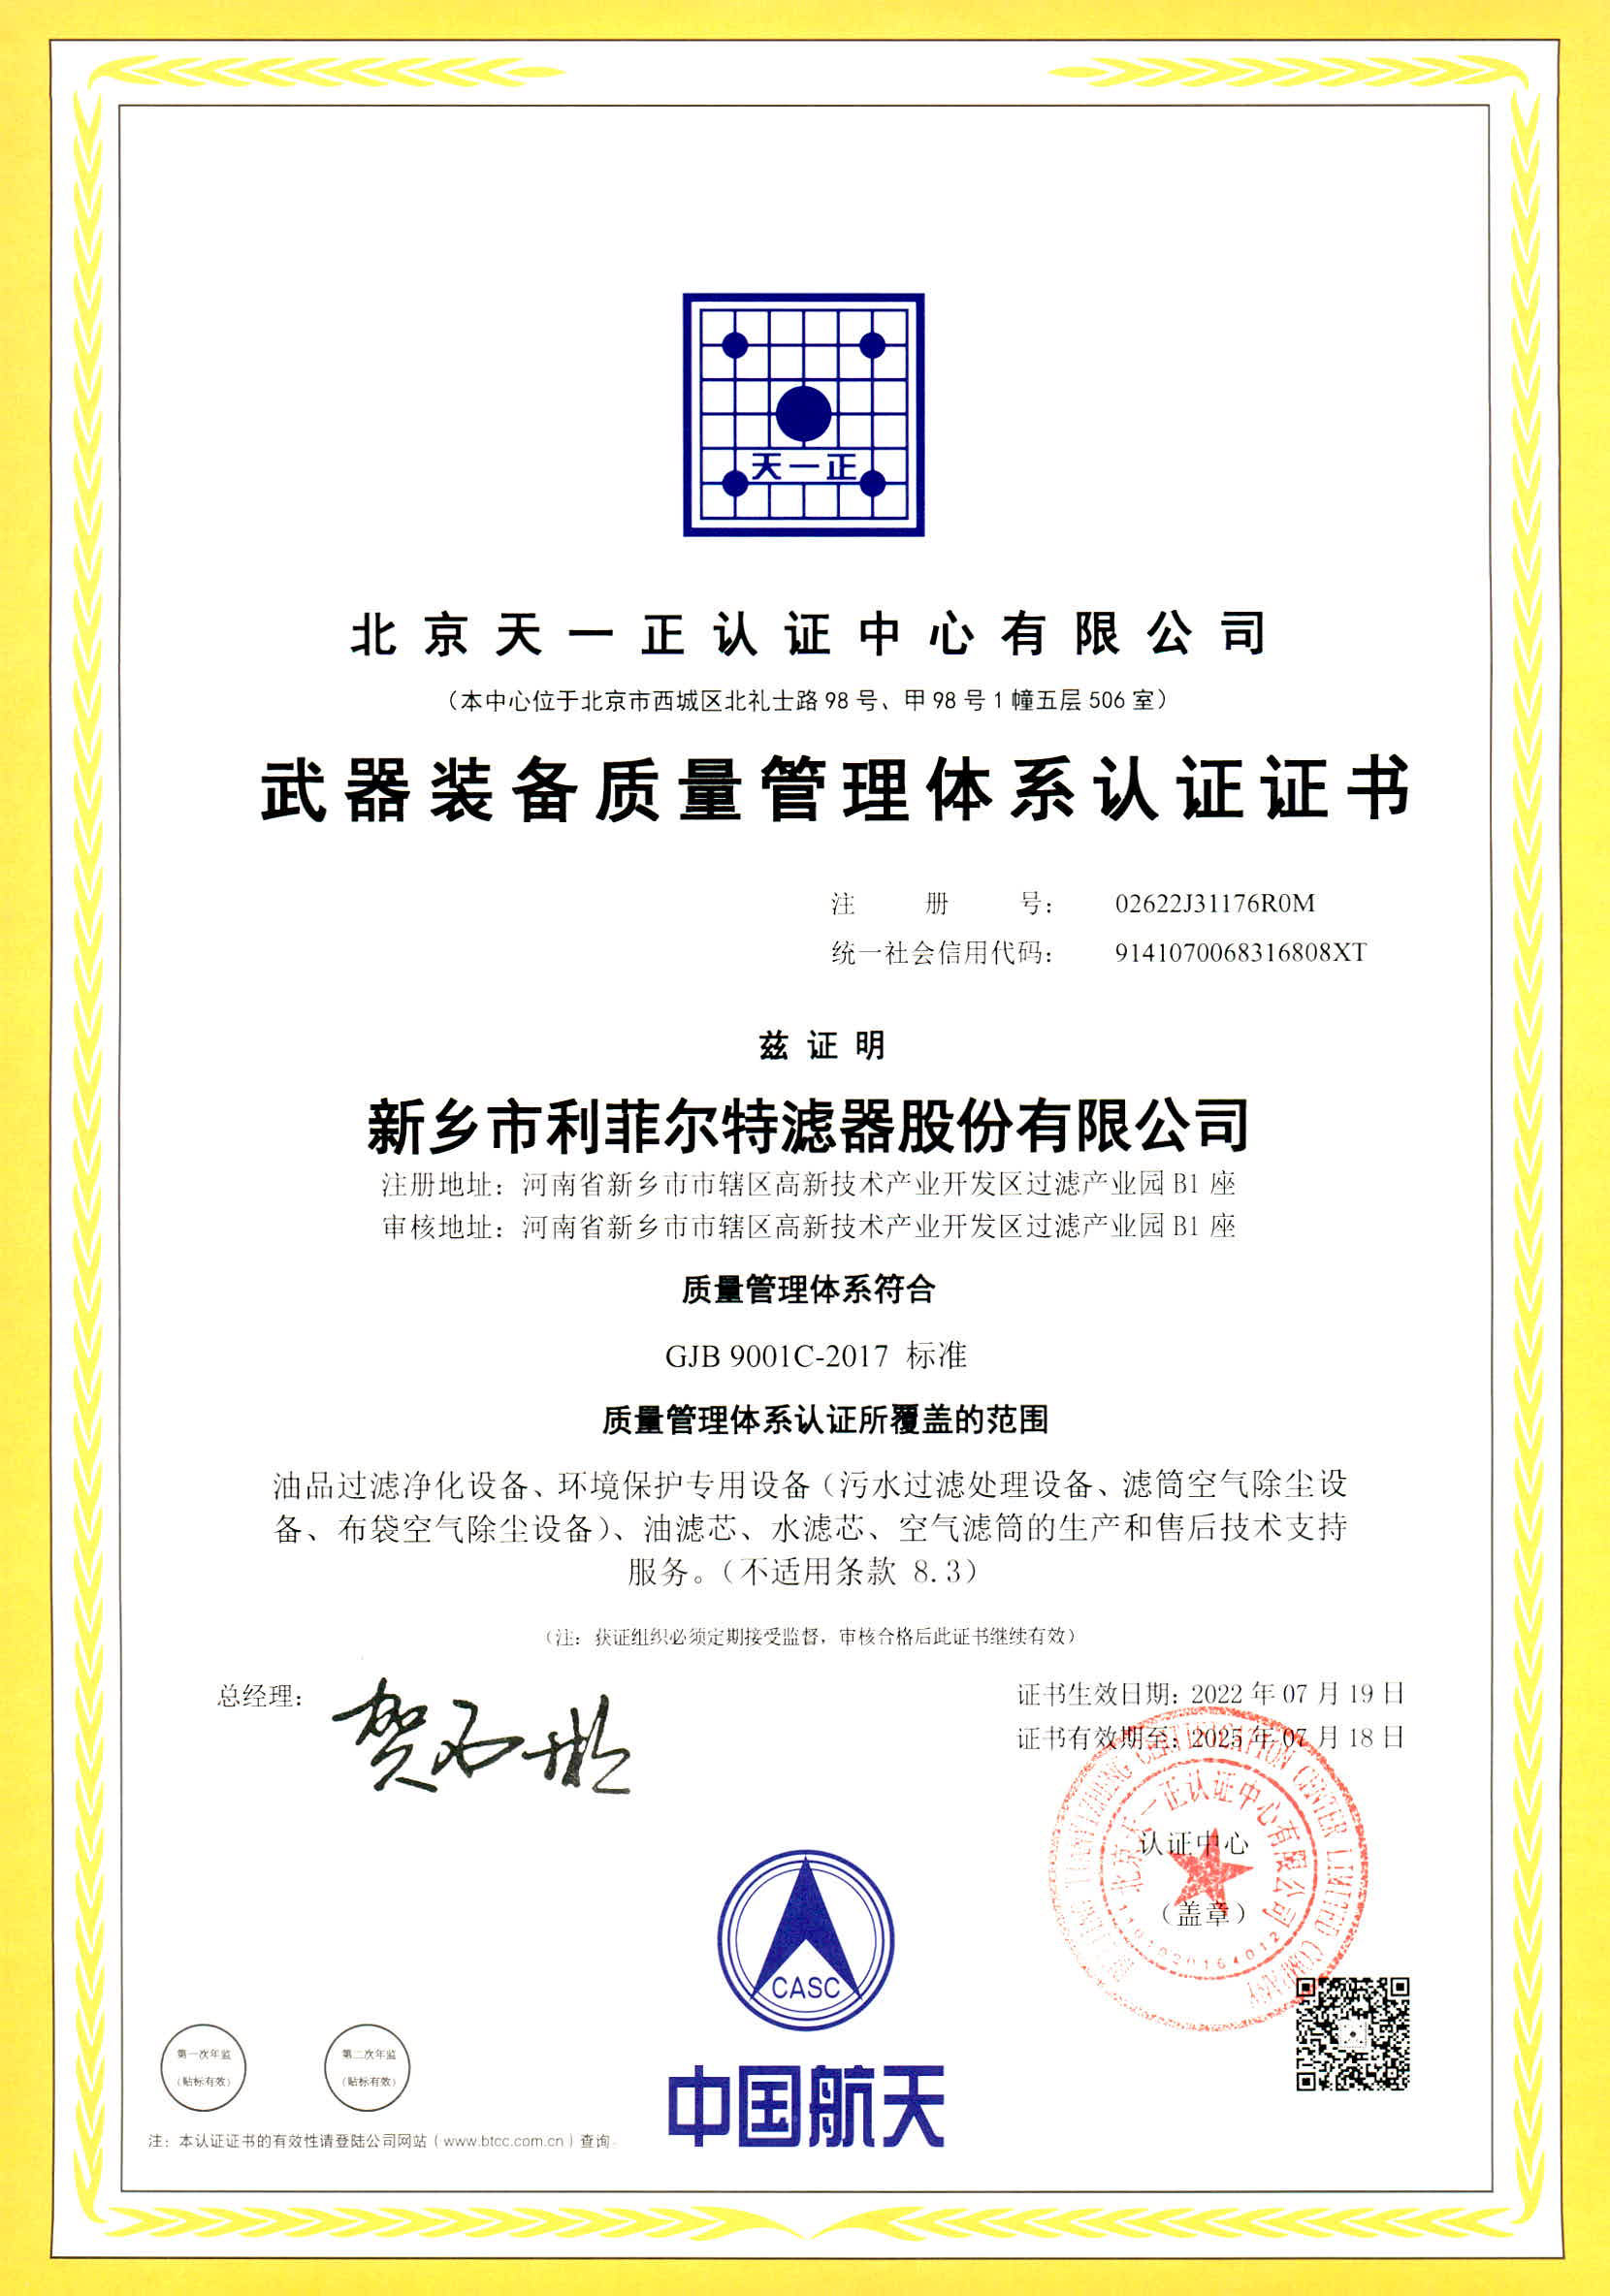 Certificate of Honor: Certificate of Weapon Equipment Quality Management System